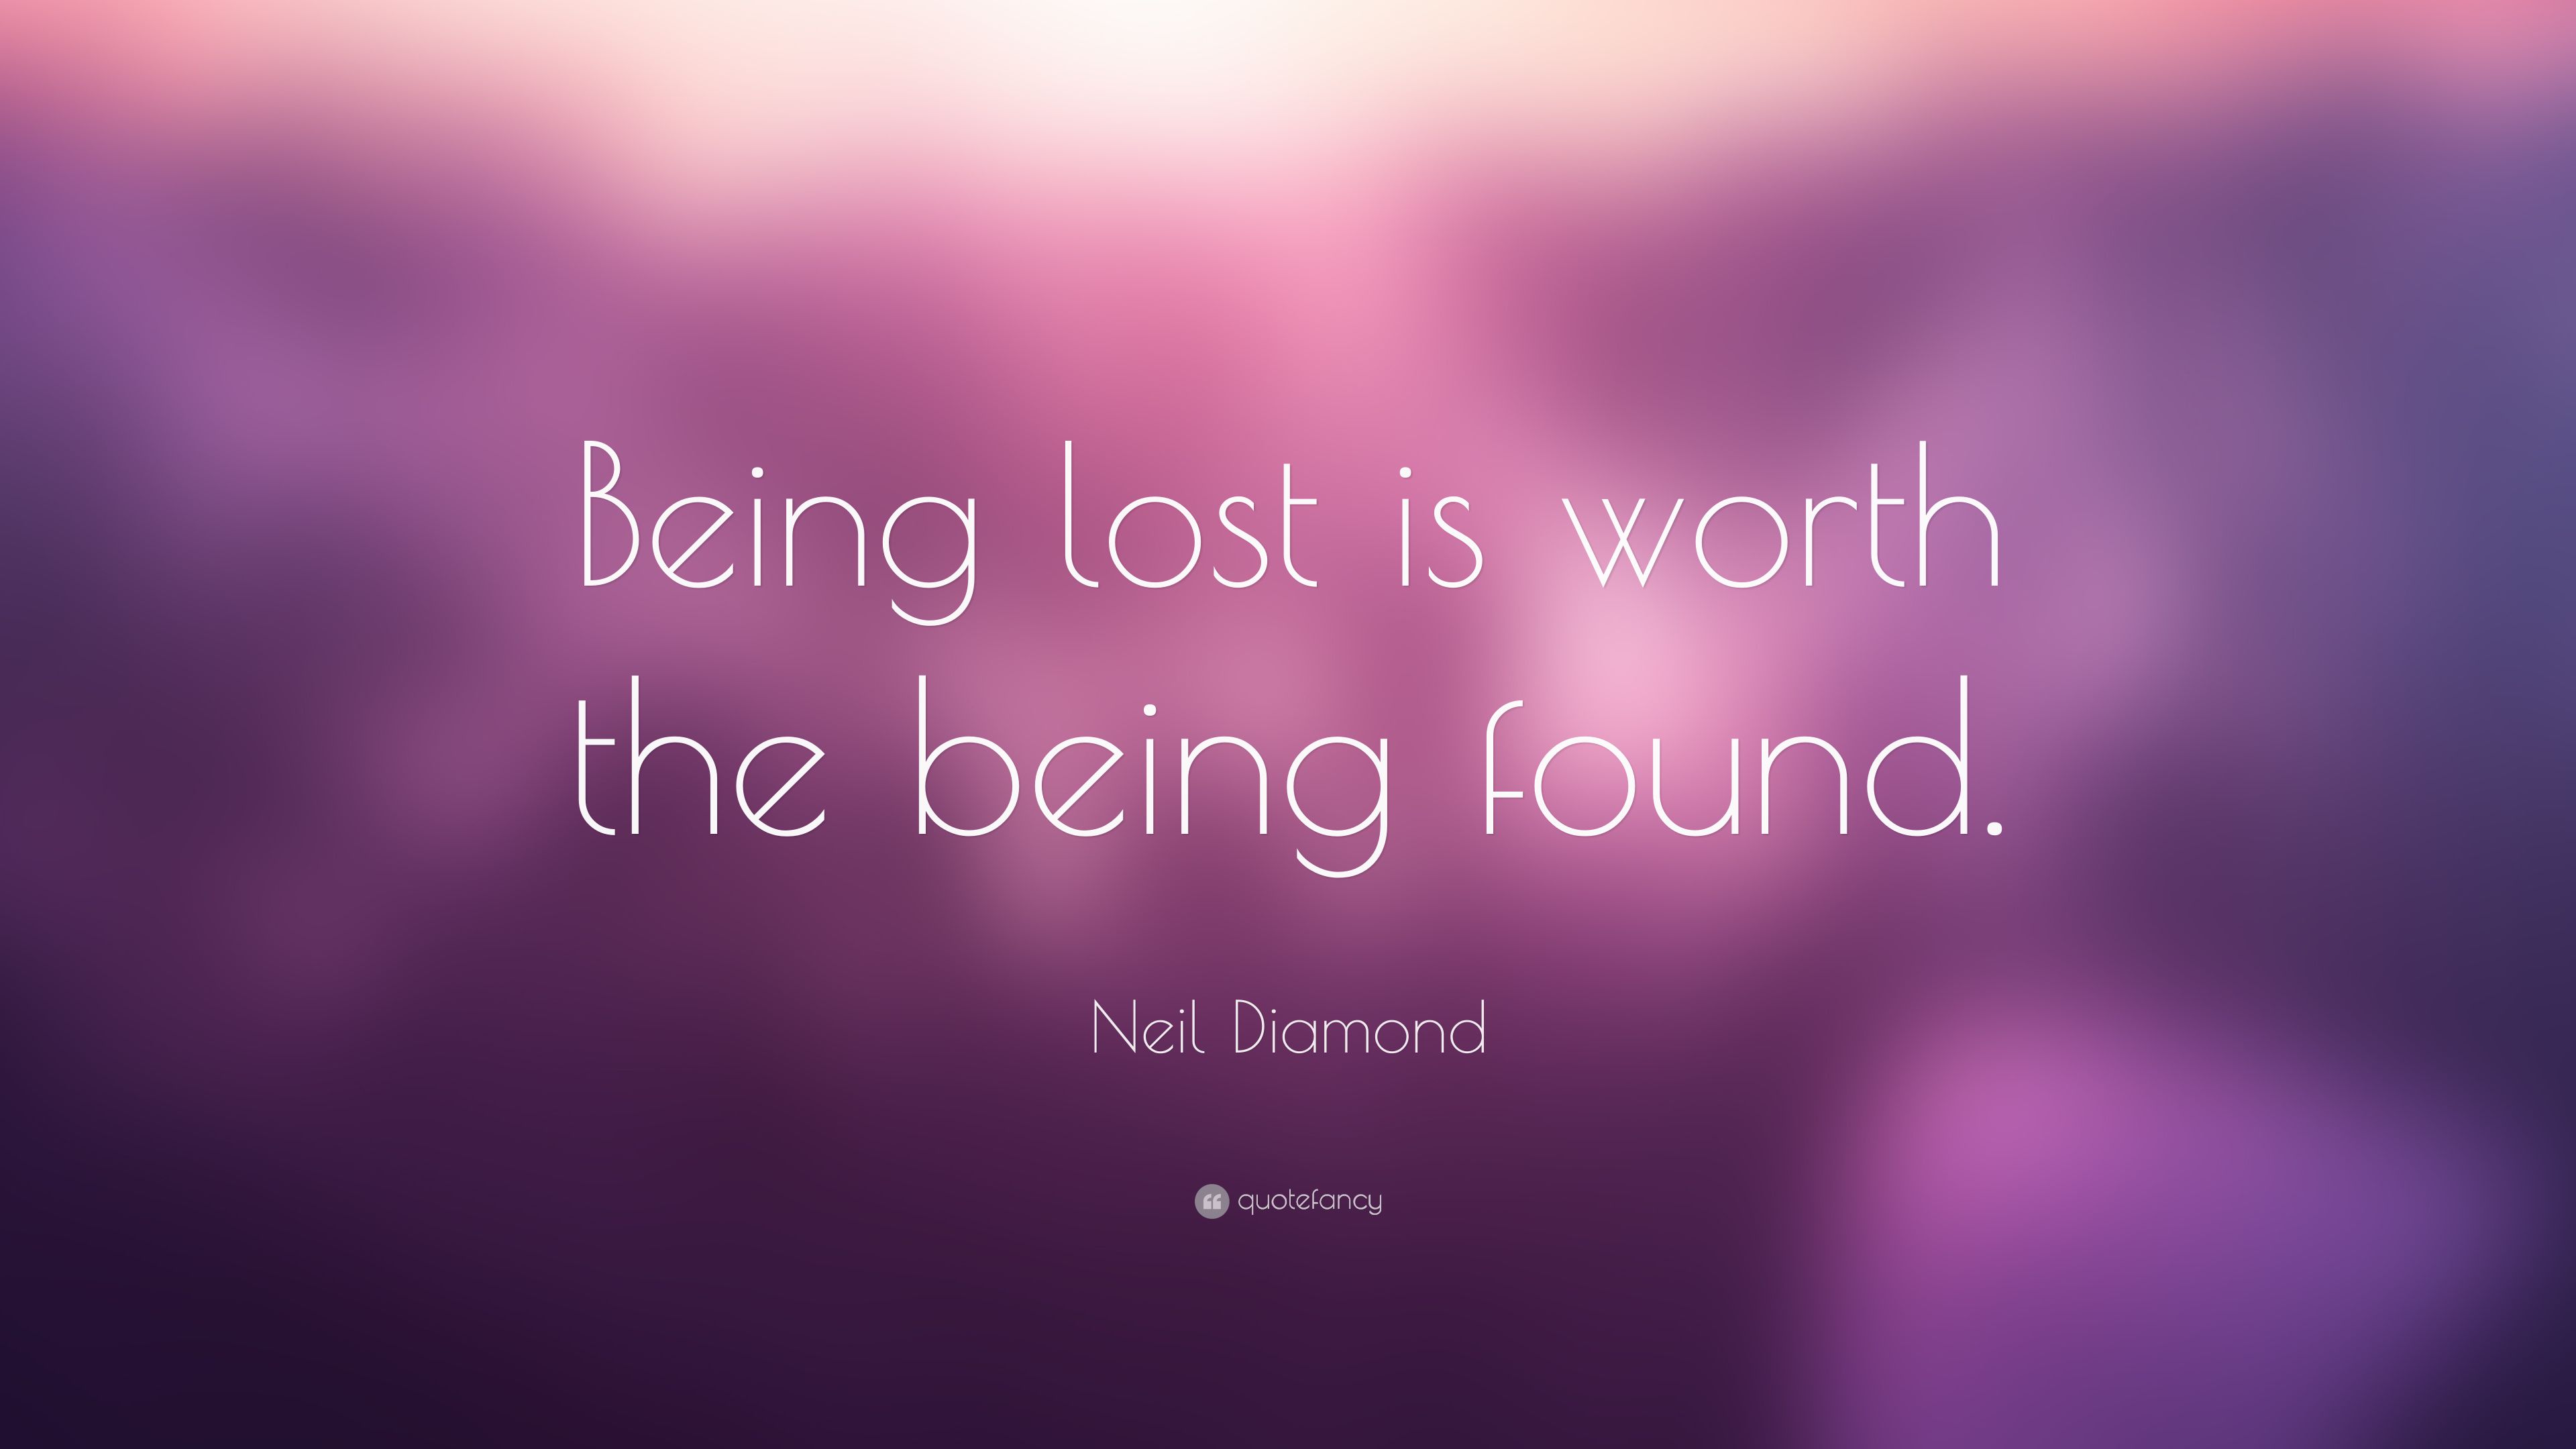 Neil Diamond Quote: “Being lost is worth the being found.” 7